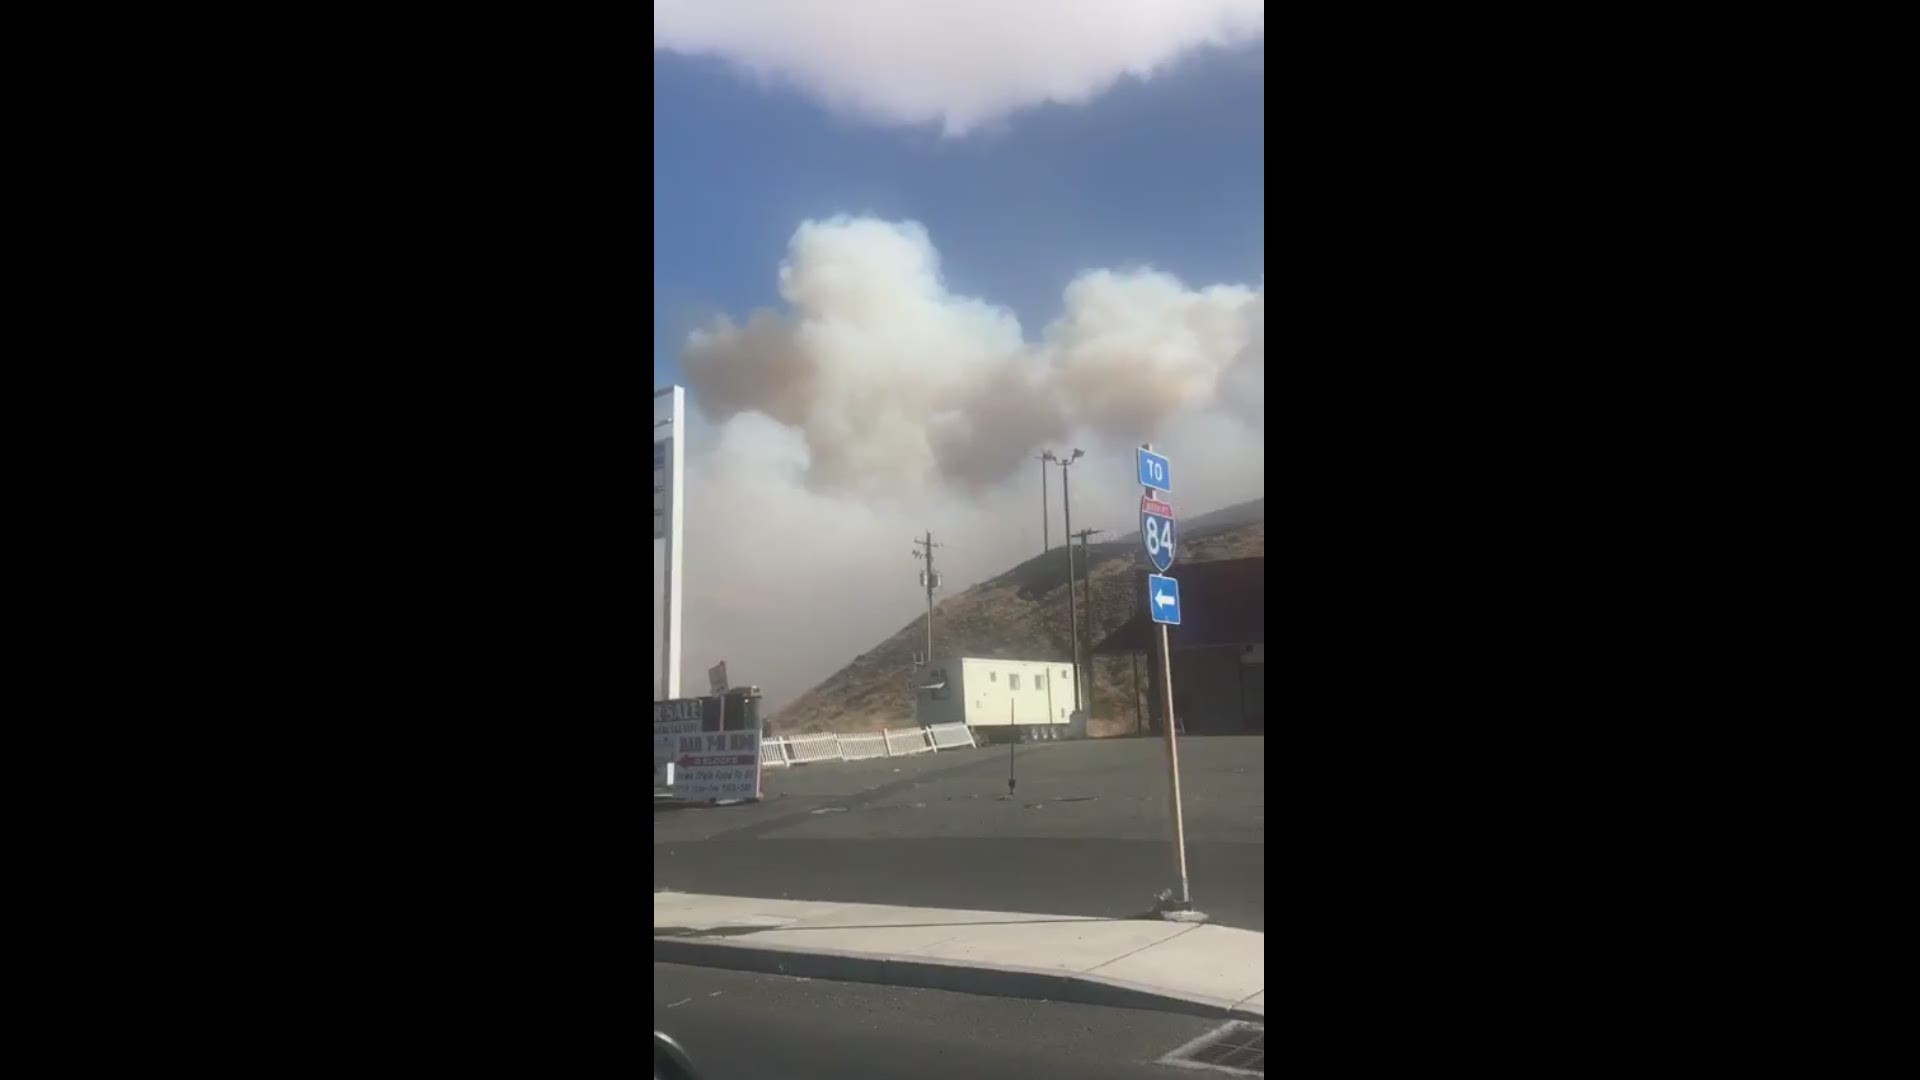 Fire breaks out in Biggs Junction, Oregon on Oct. 2, 2018. Video courtesy of Sarah Beers-Newton